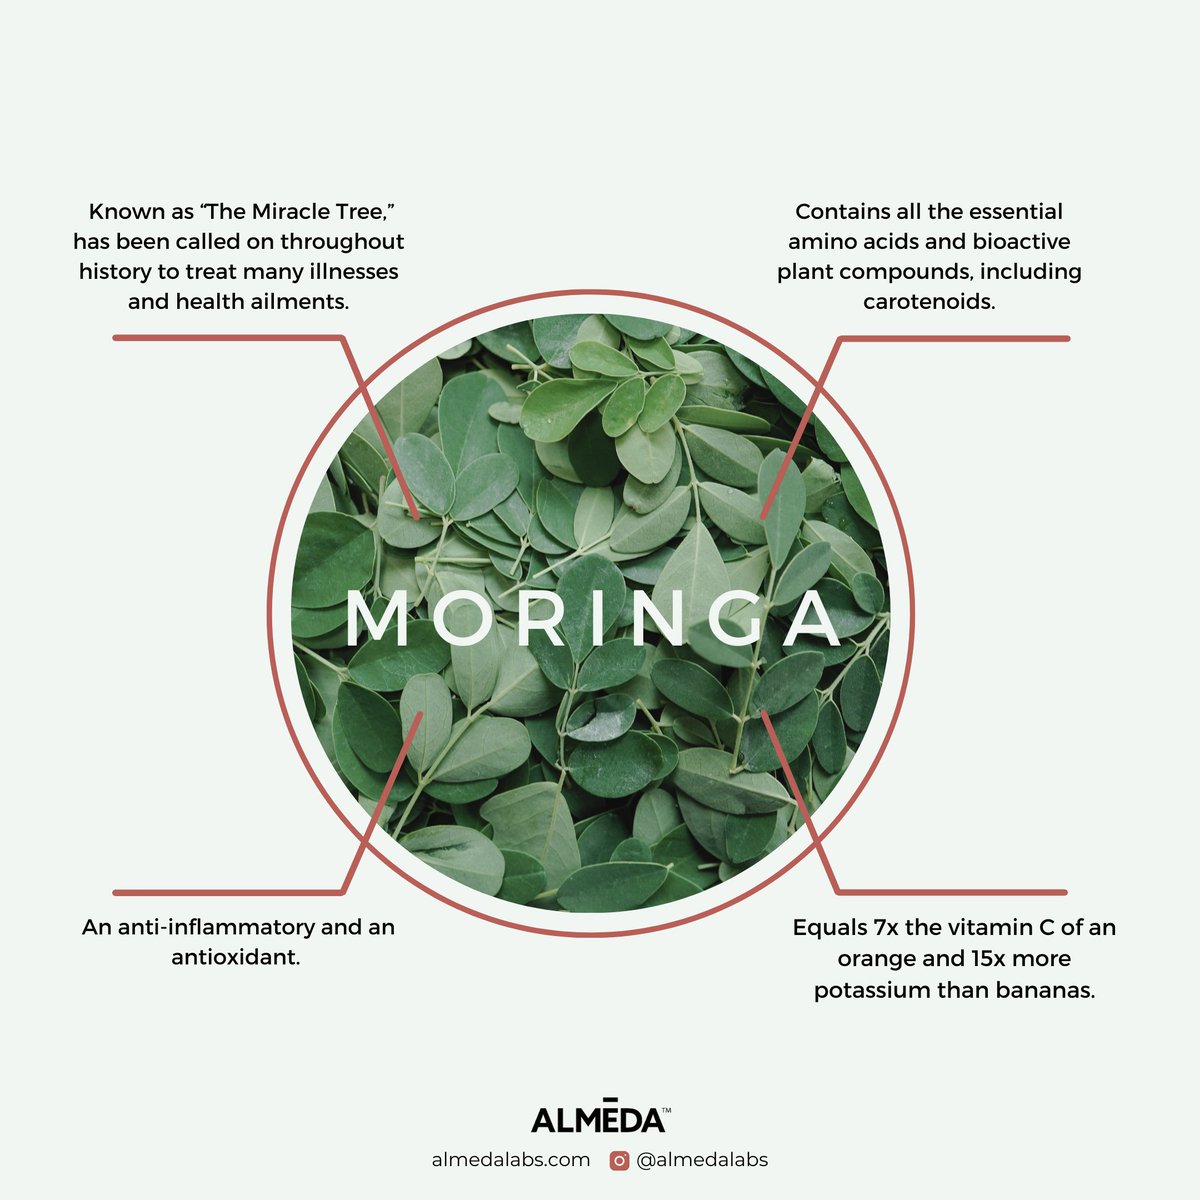 Known as 'the Miracle Tree', #moringa is on of our supergreens in Kasvi. #cellularnutrition

almedalabs.com/blogs/almeda-l…